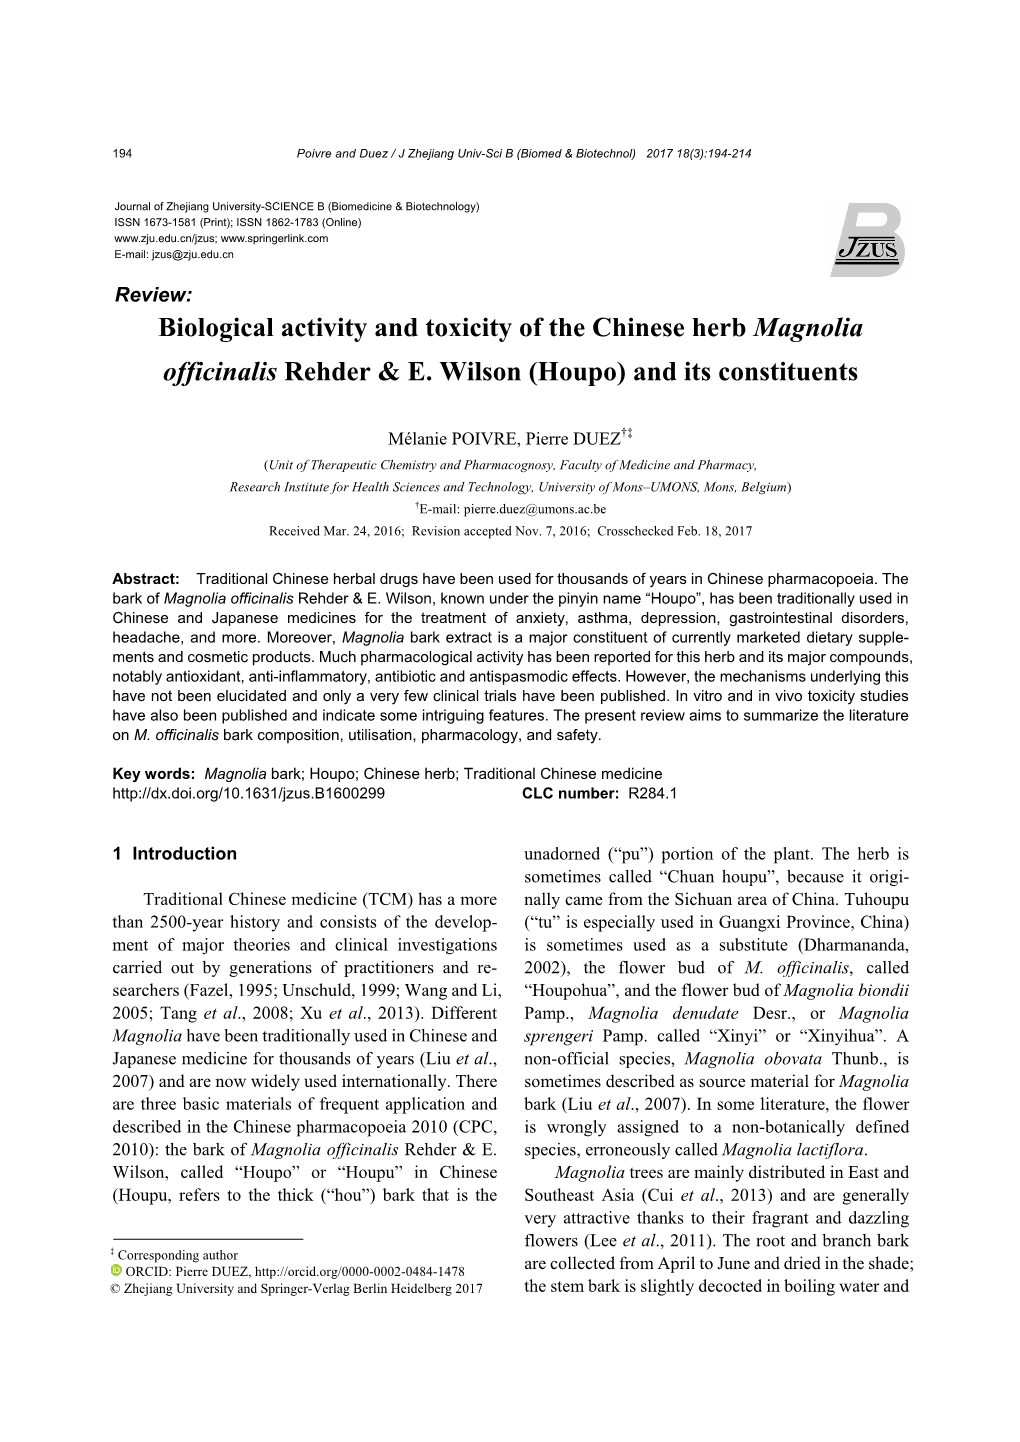 Biological Activity and Toxicity of the Chinese Herb Magnolia Officinalis Rehder & E